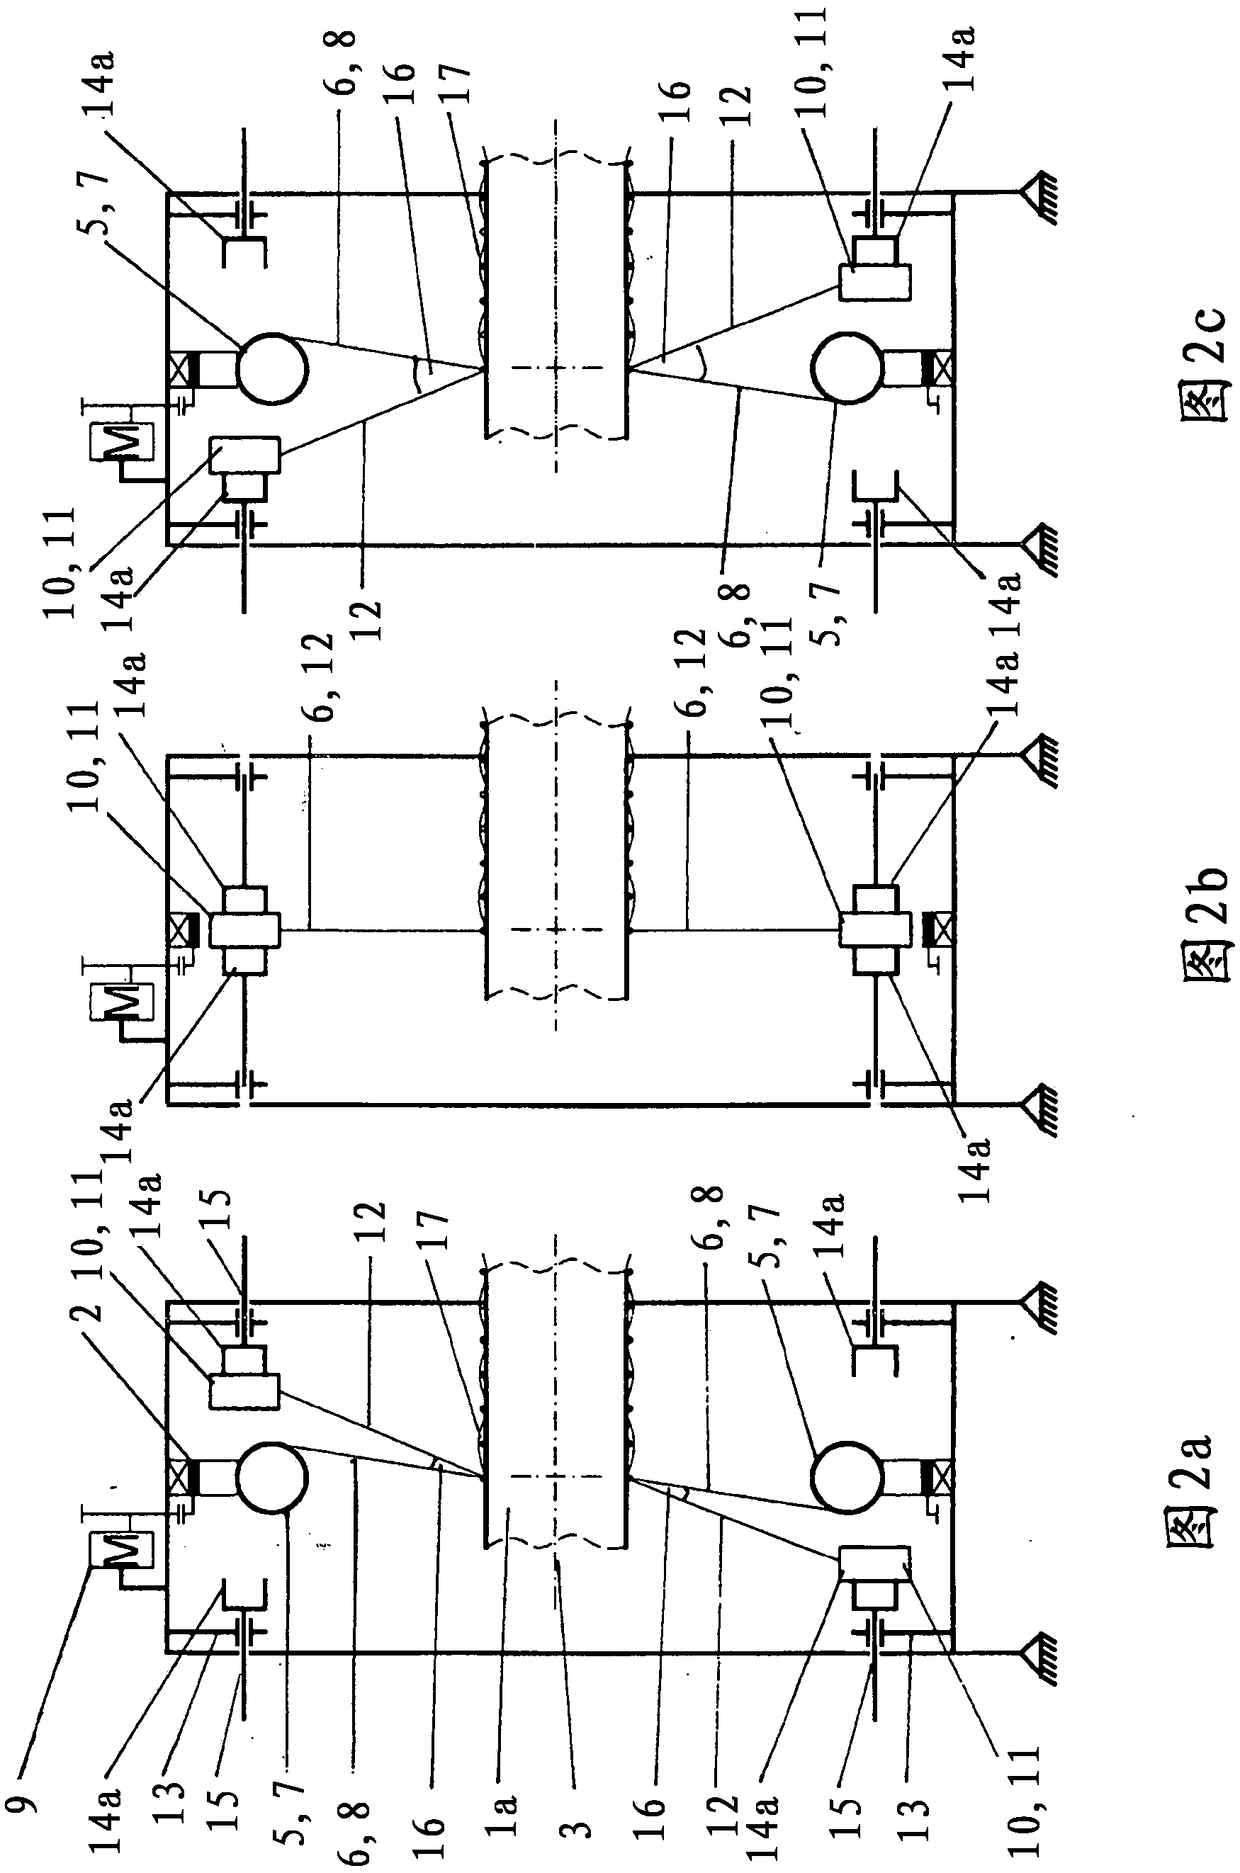 Circular weaving machine and method for producing a hollow profile-like fabric